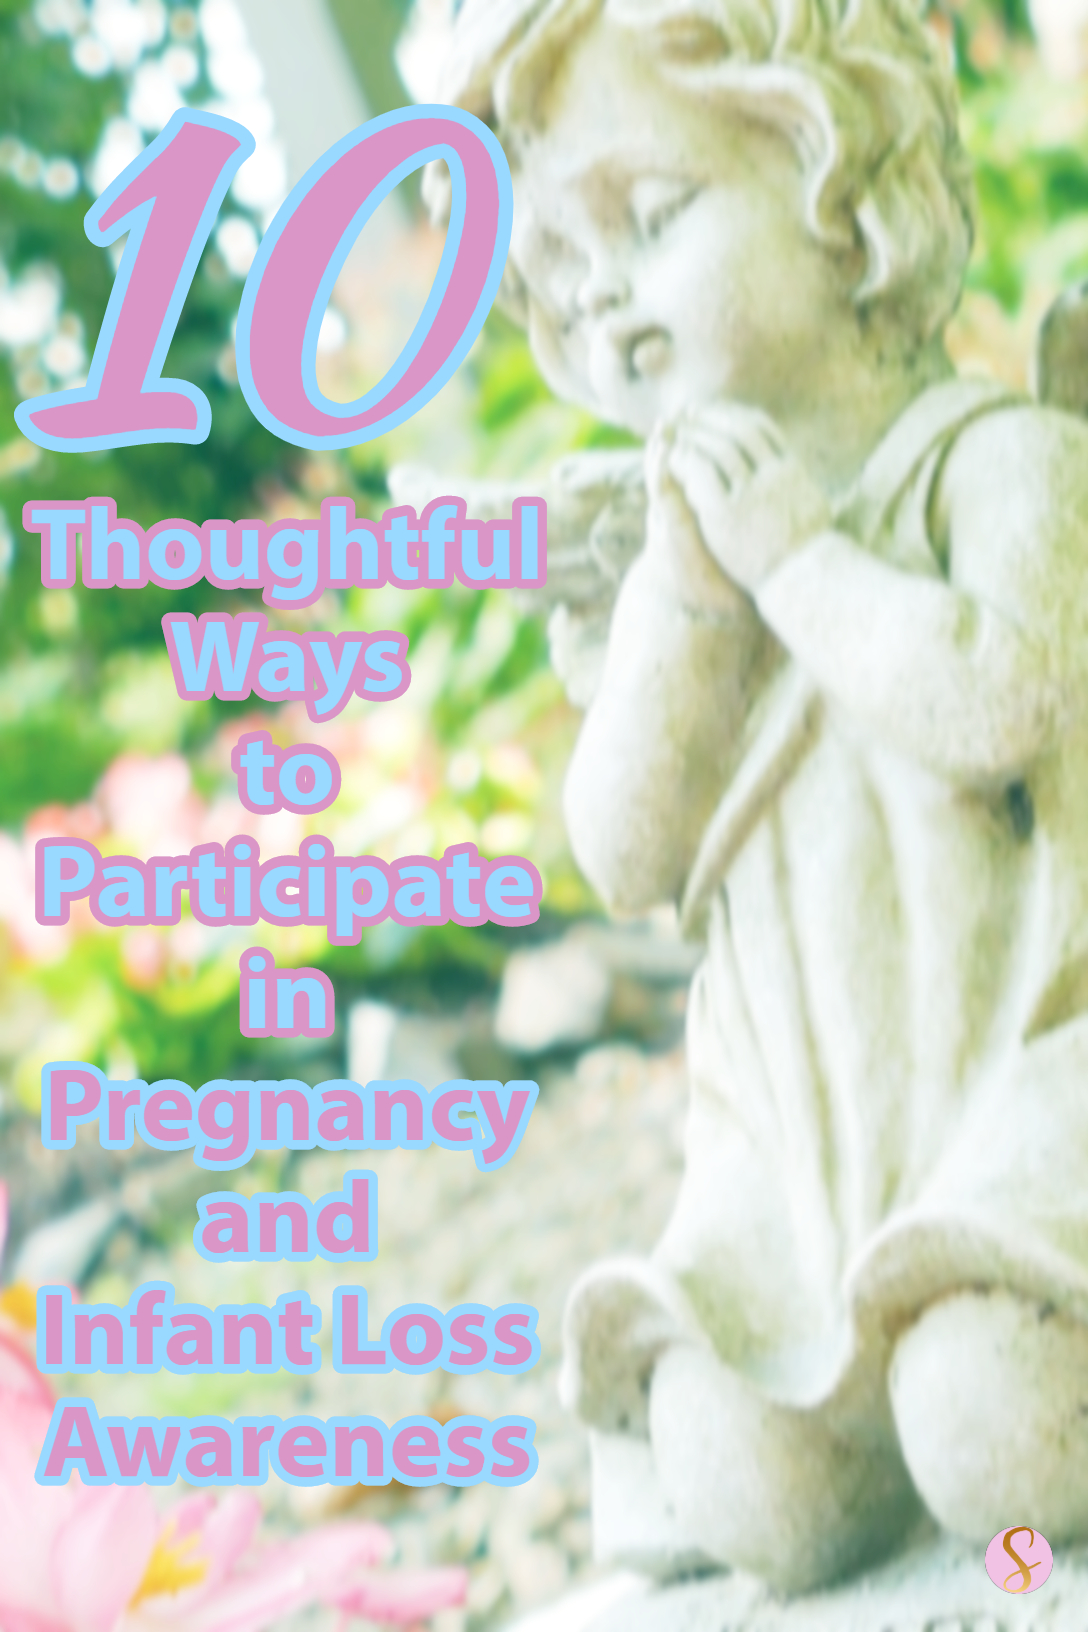 national-pregnancy-and-infant-loss-awareness-day.jpg